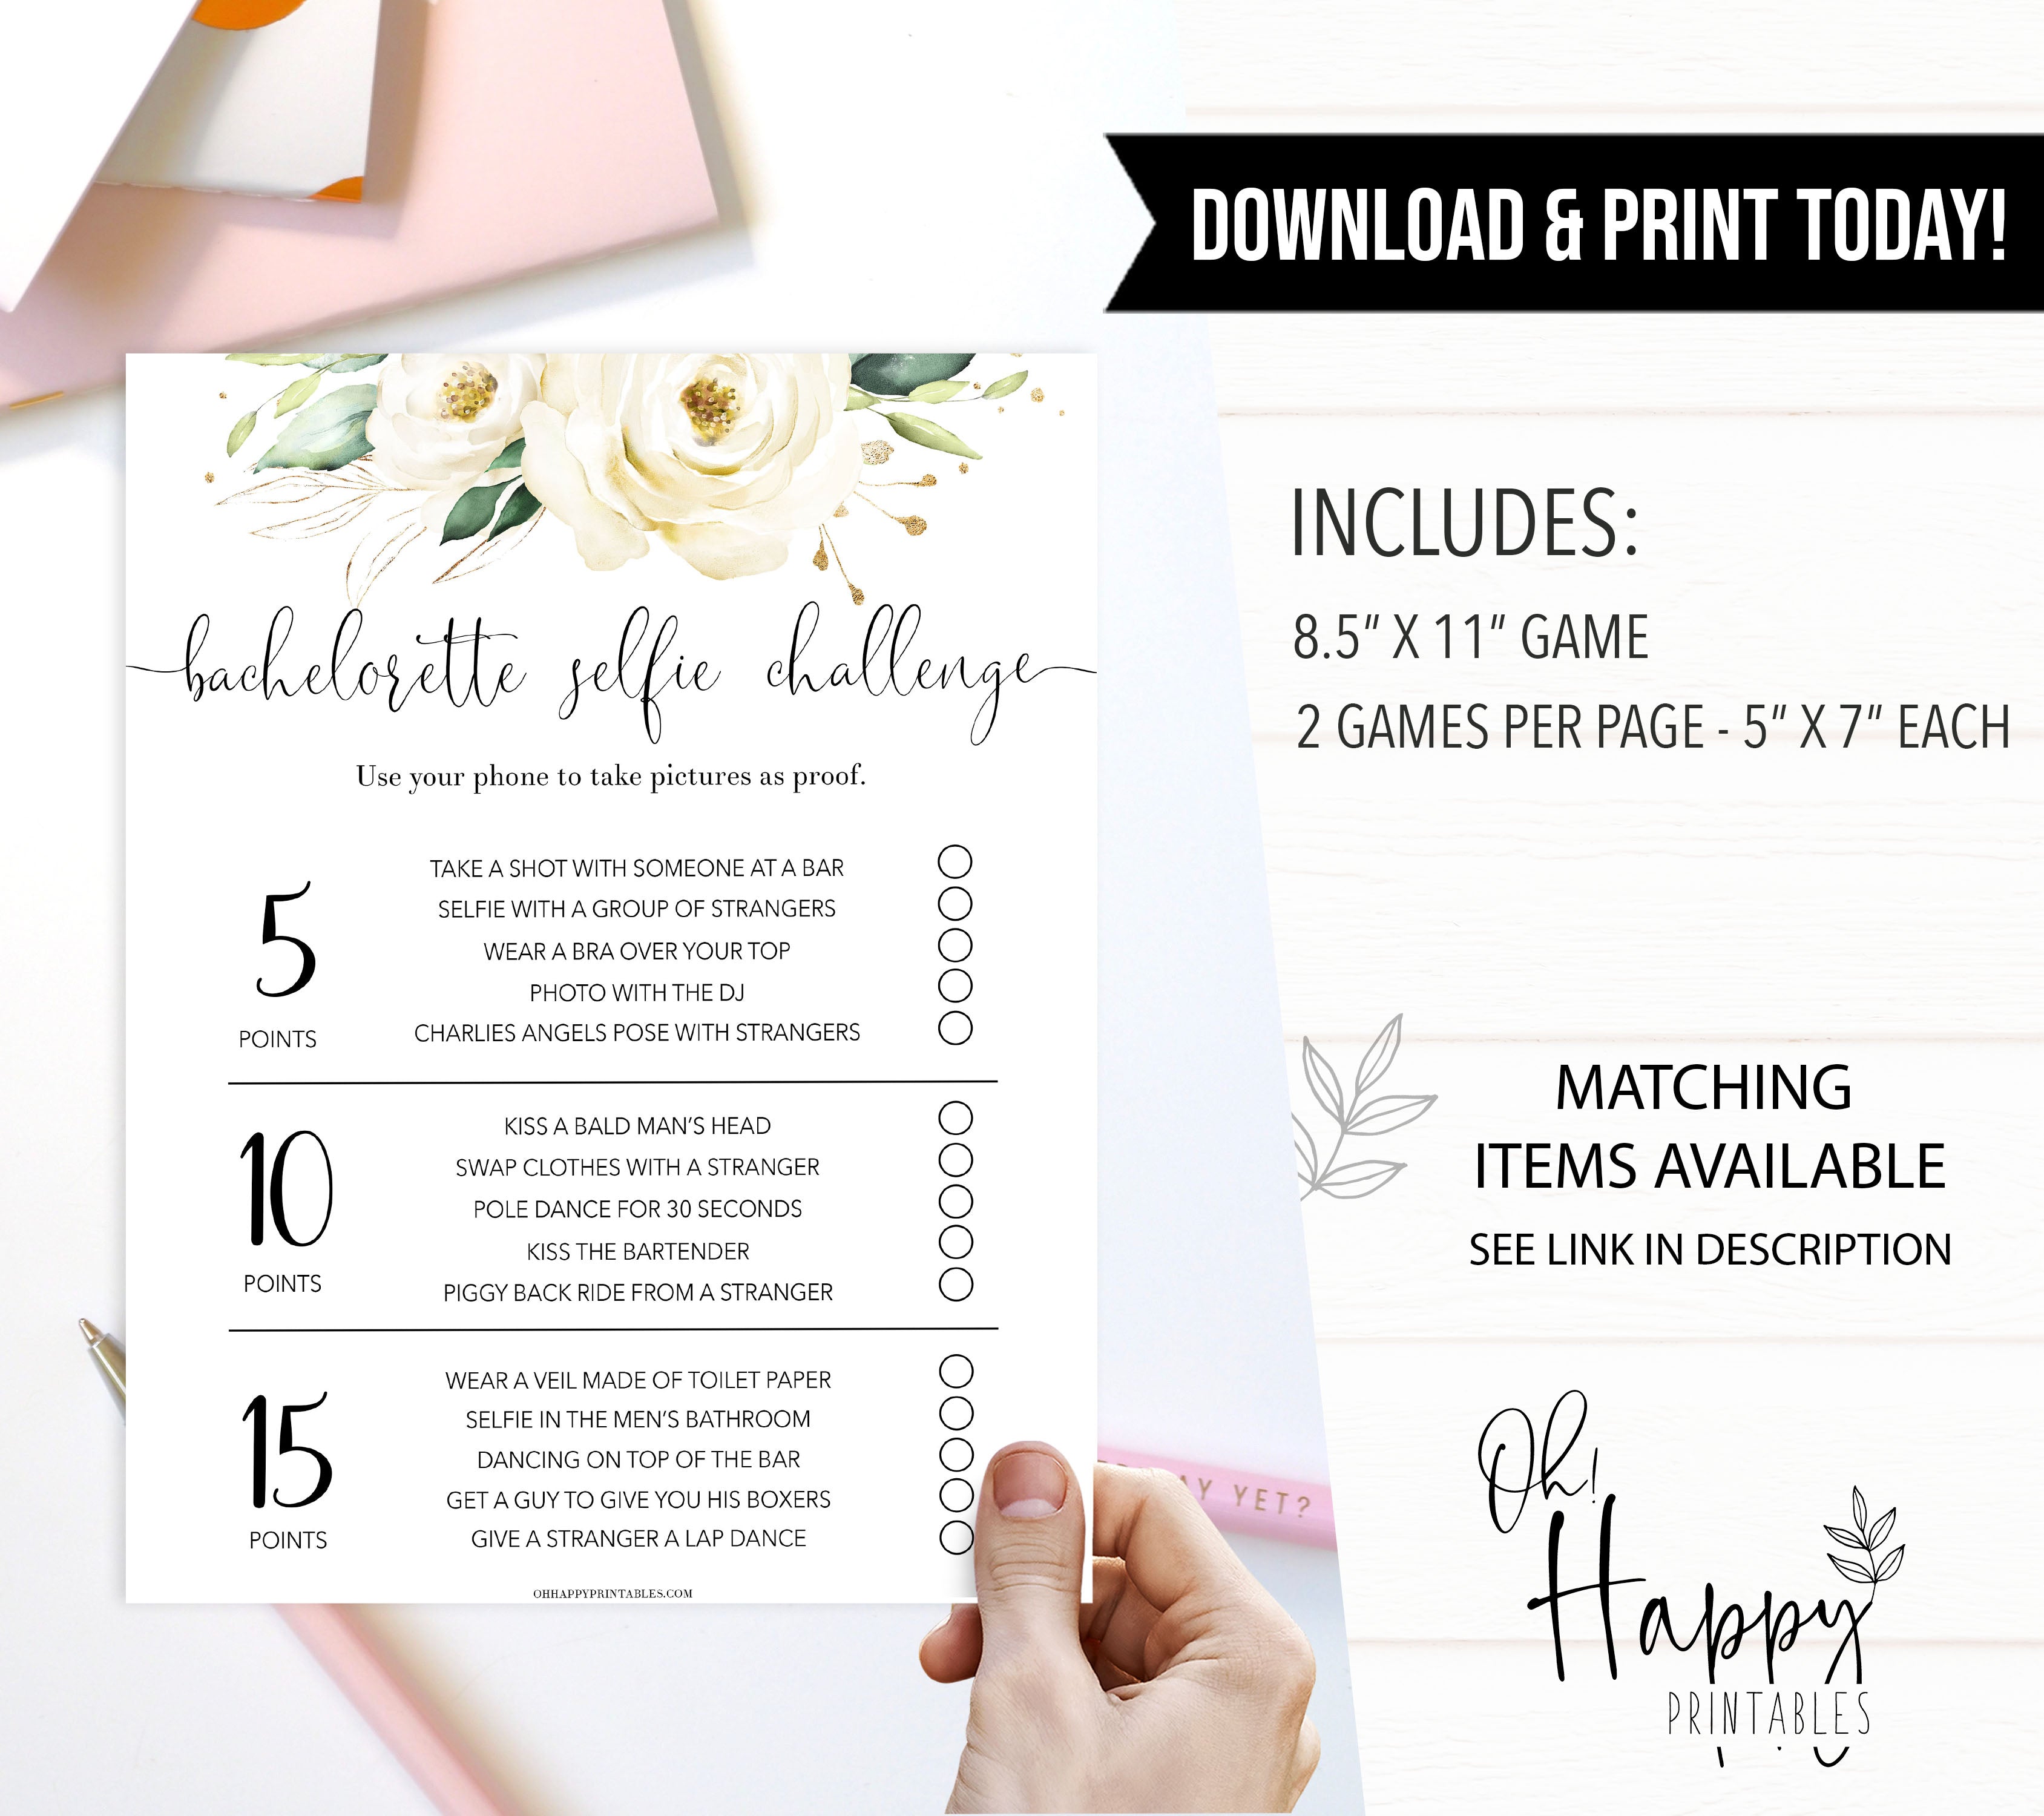 bachelorette selfie challenge game, Printable bachelorette games, floral bachelorette, floral hen party games, fun hen party games, bachelorette game ideas, floral adult party games, naughty hen games, naughty bachelorette games